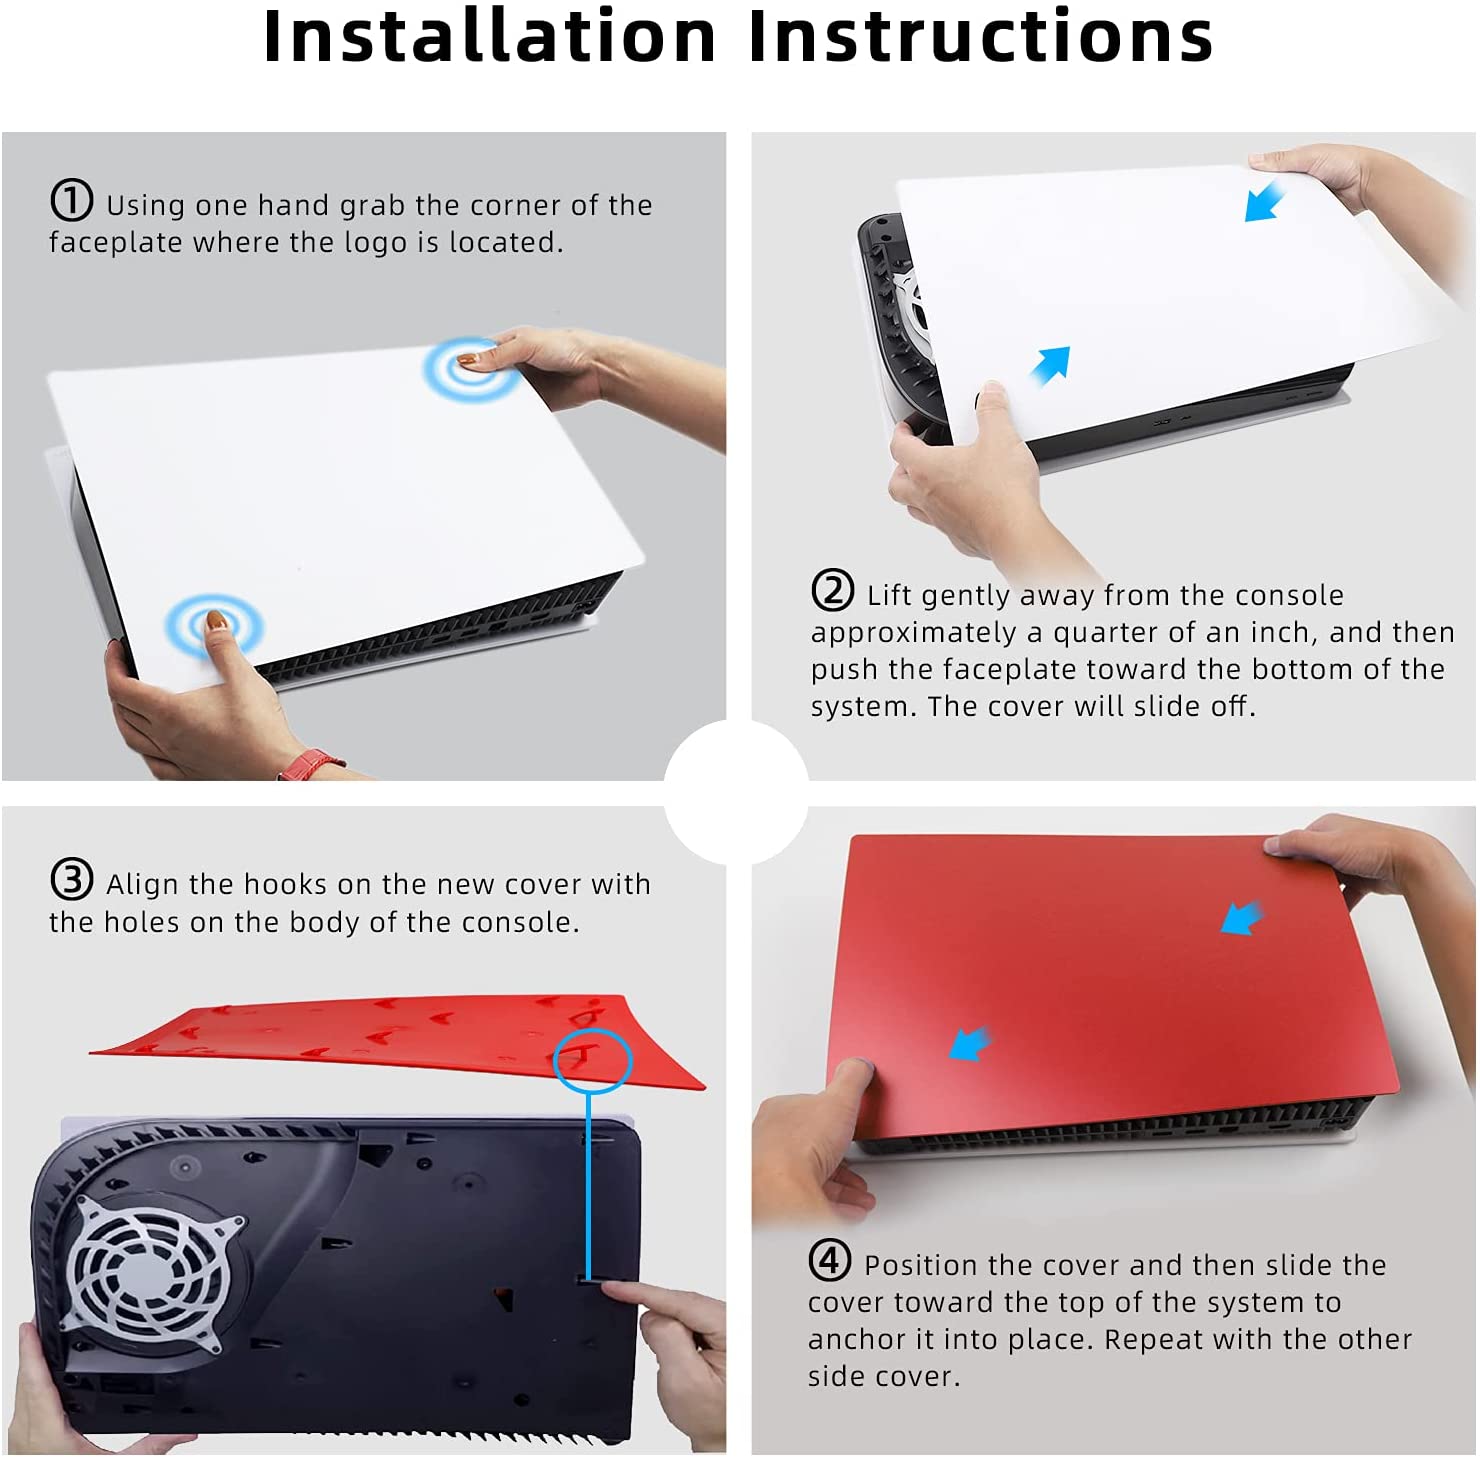 Step-by-step guide to remove the original console panel and replace it with this one.